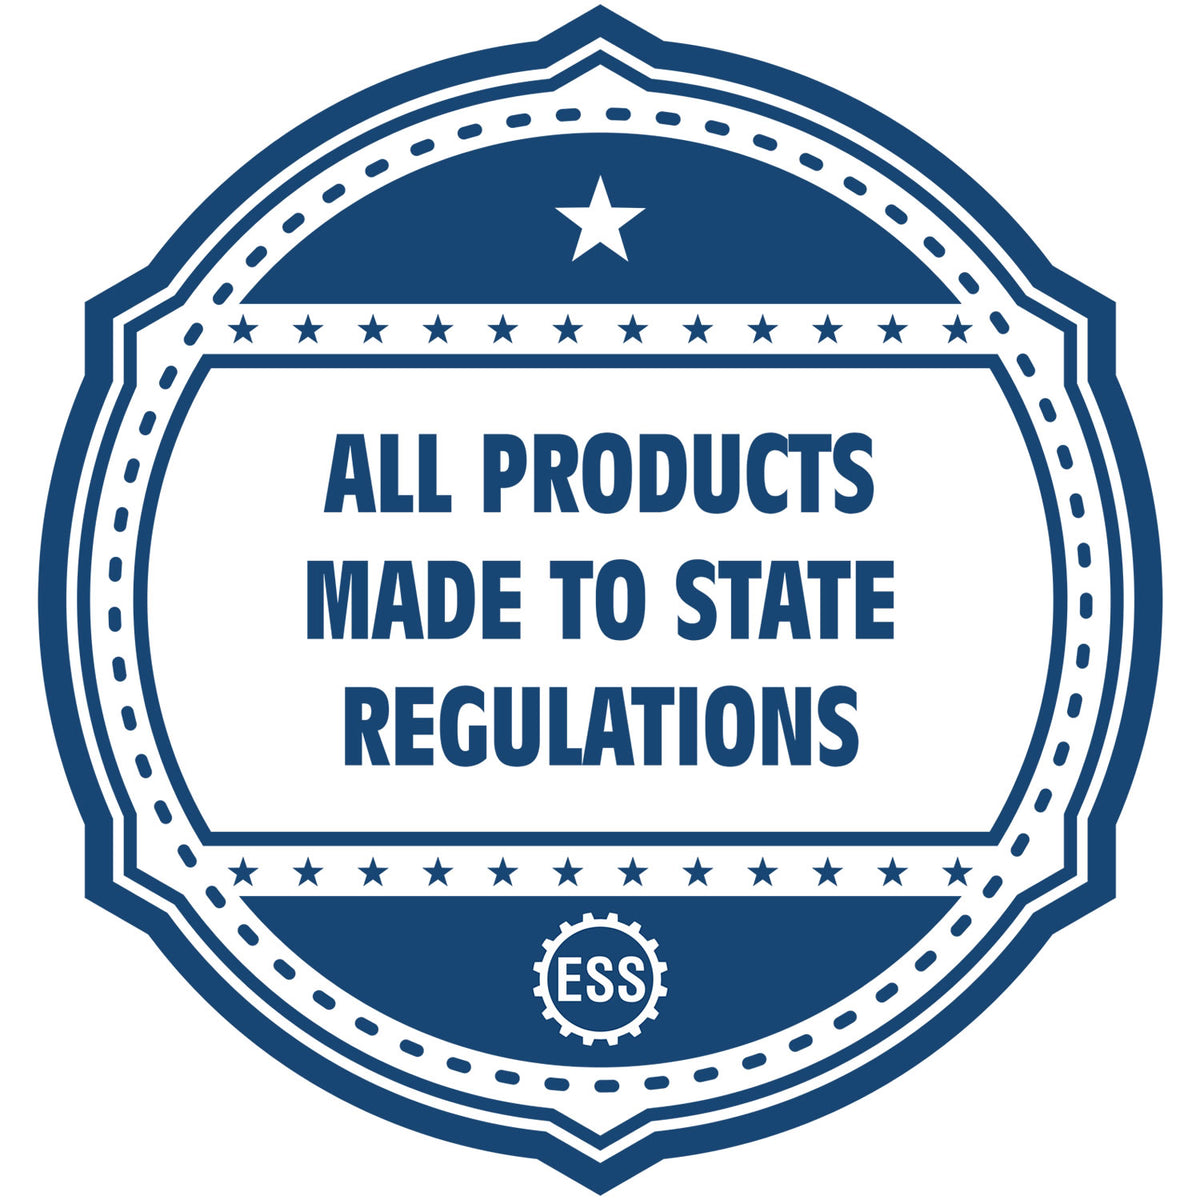 An icon or badge element for the Self-Inking Minnesota Landscape Architect Stamp showing that this product is made in compliance with state regulations.